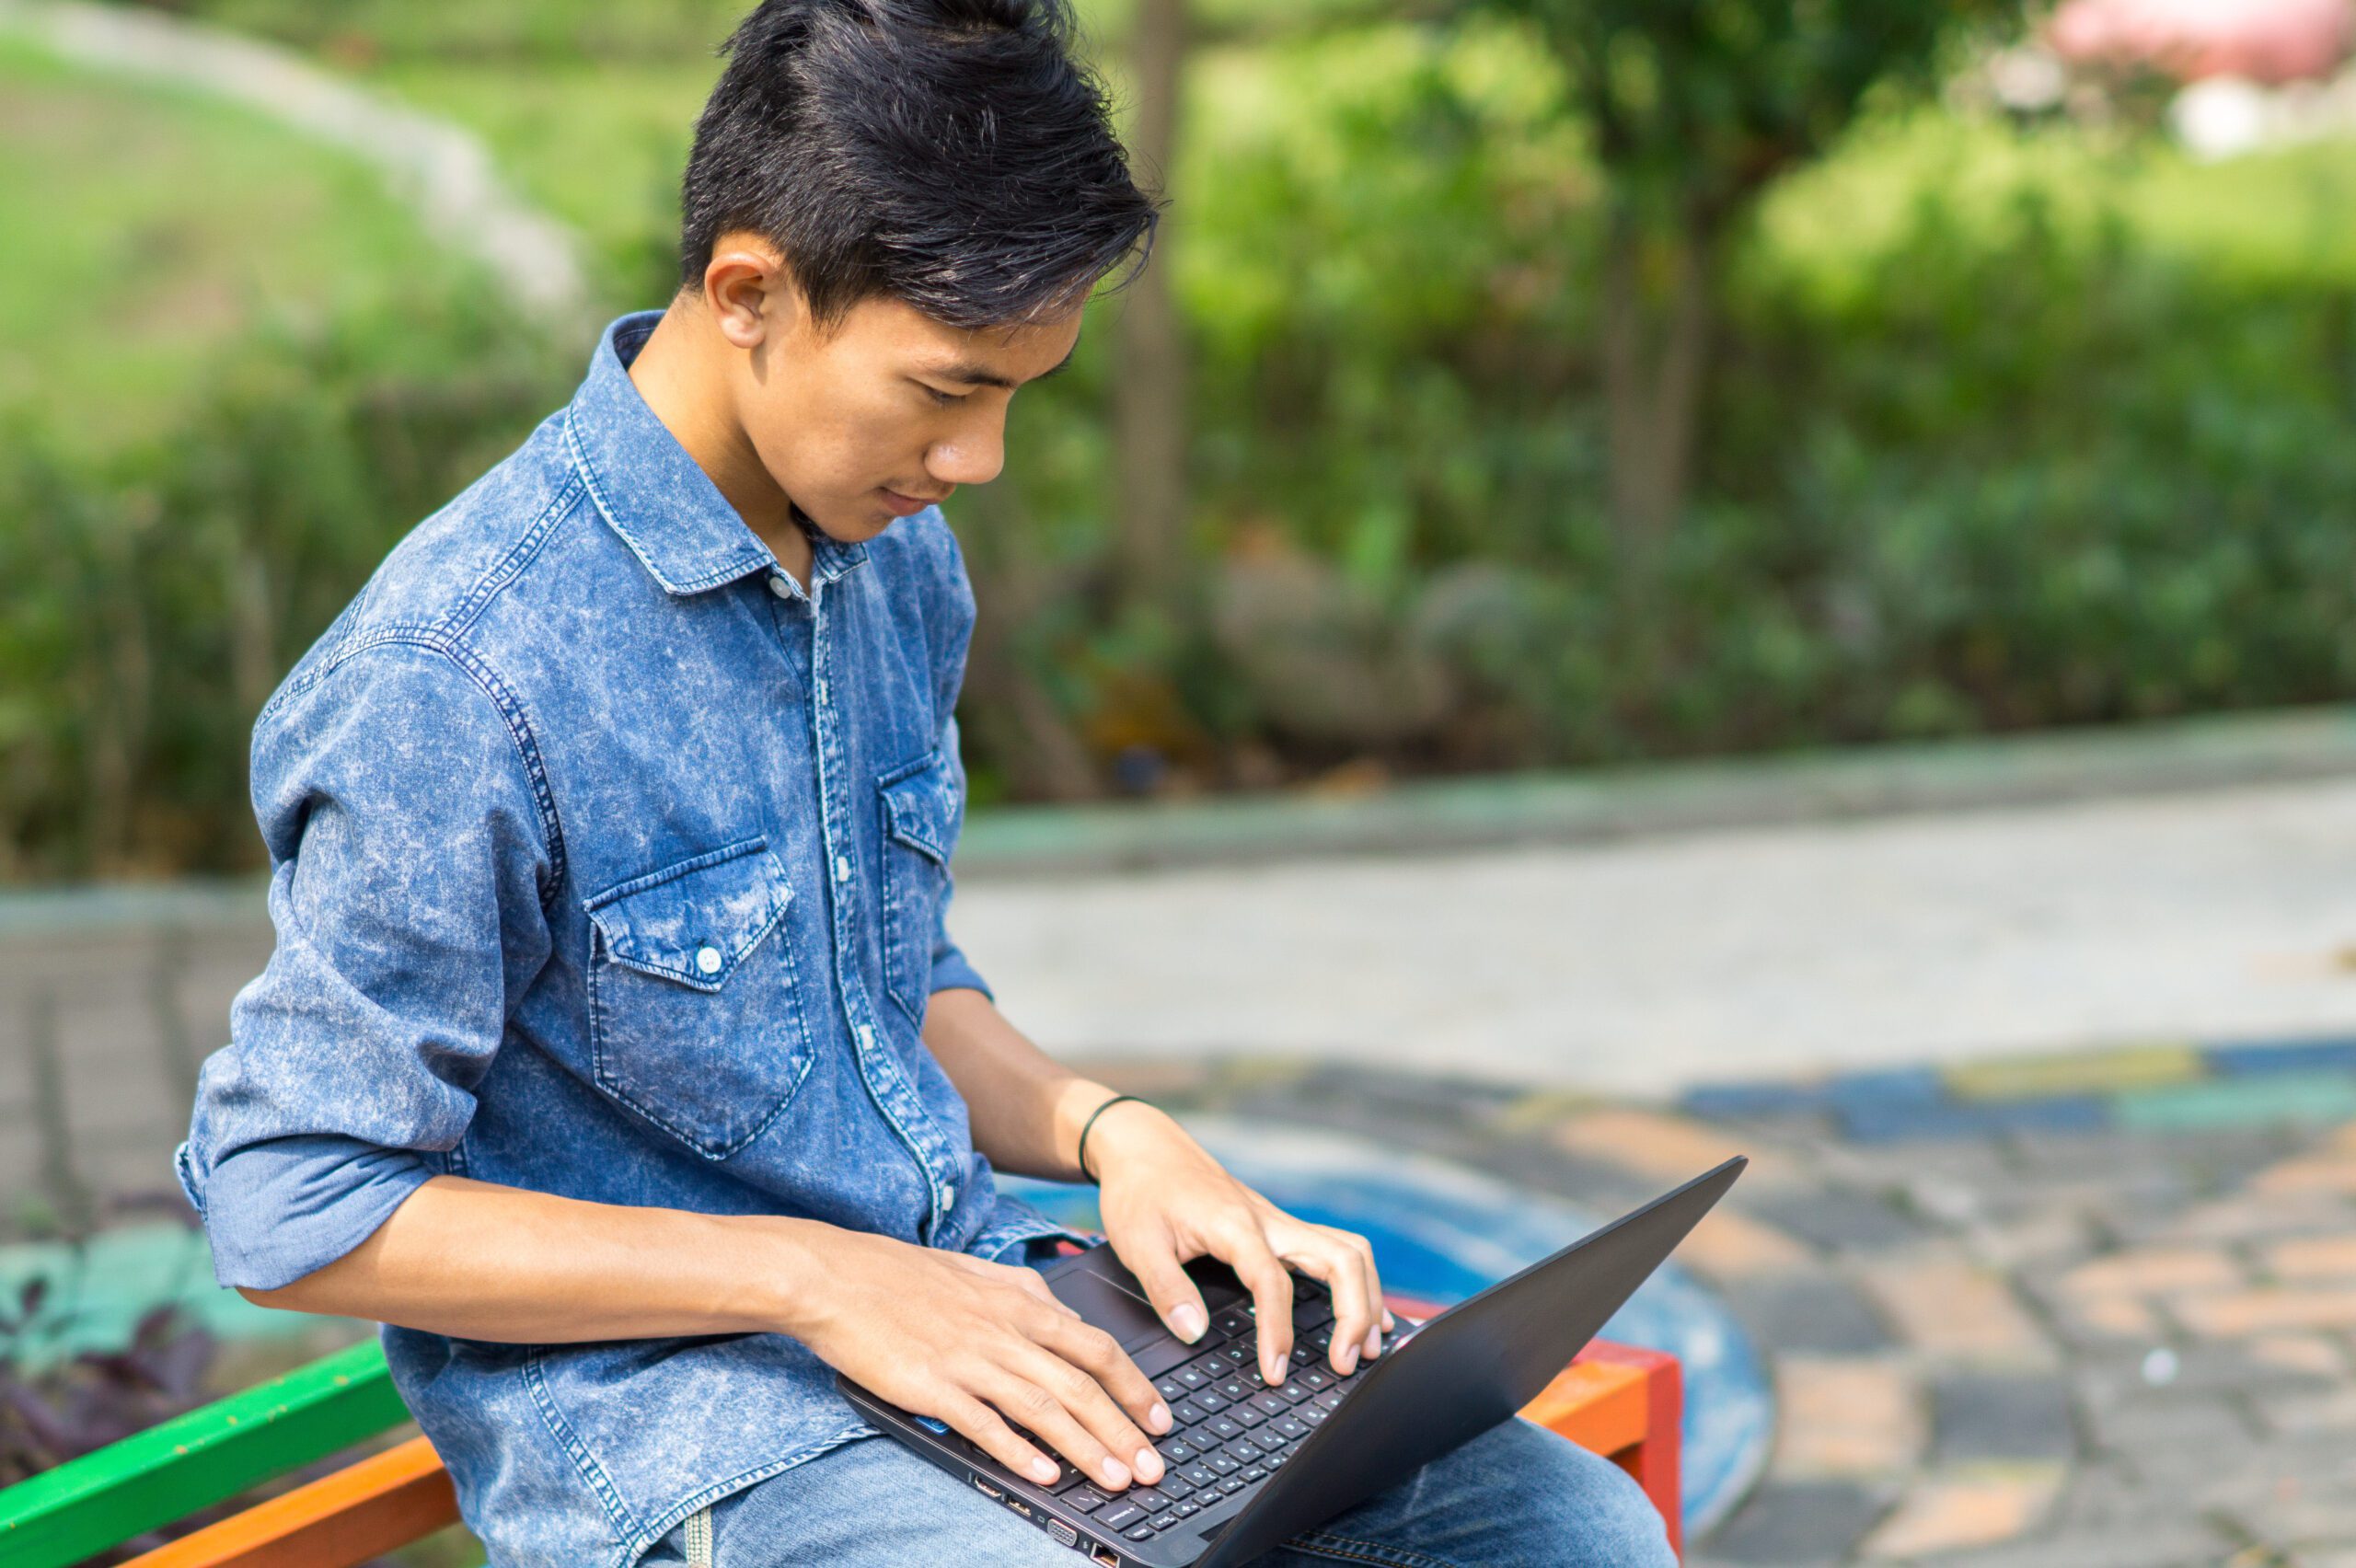 Asian young man using computer outdoor